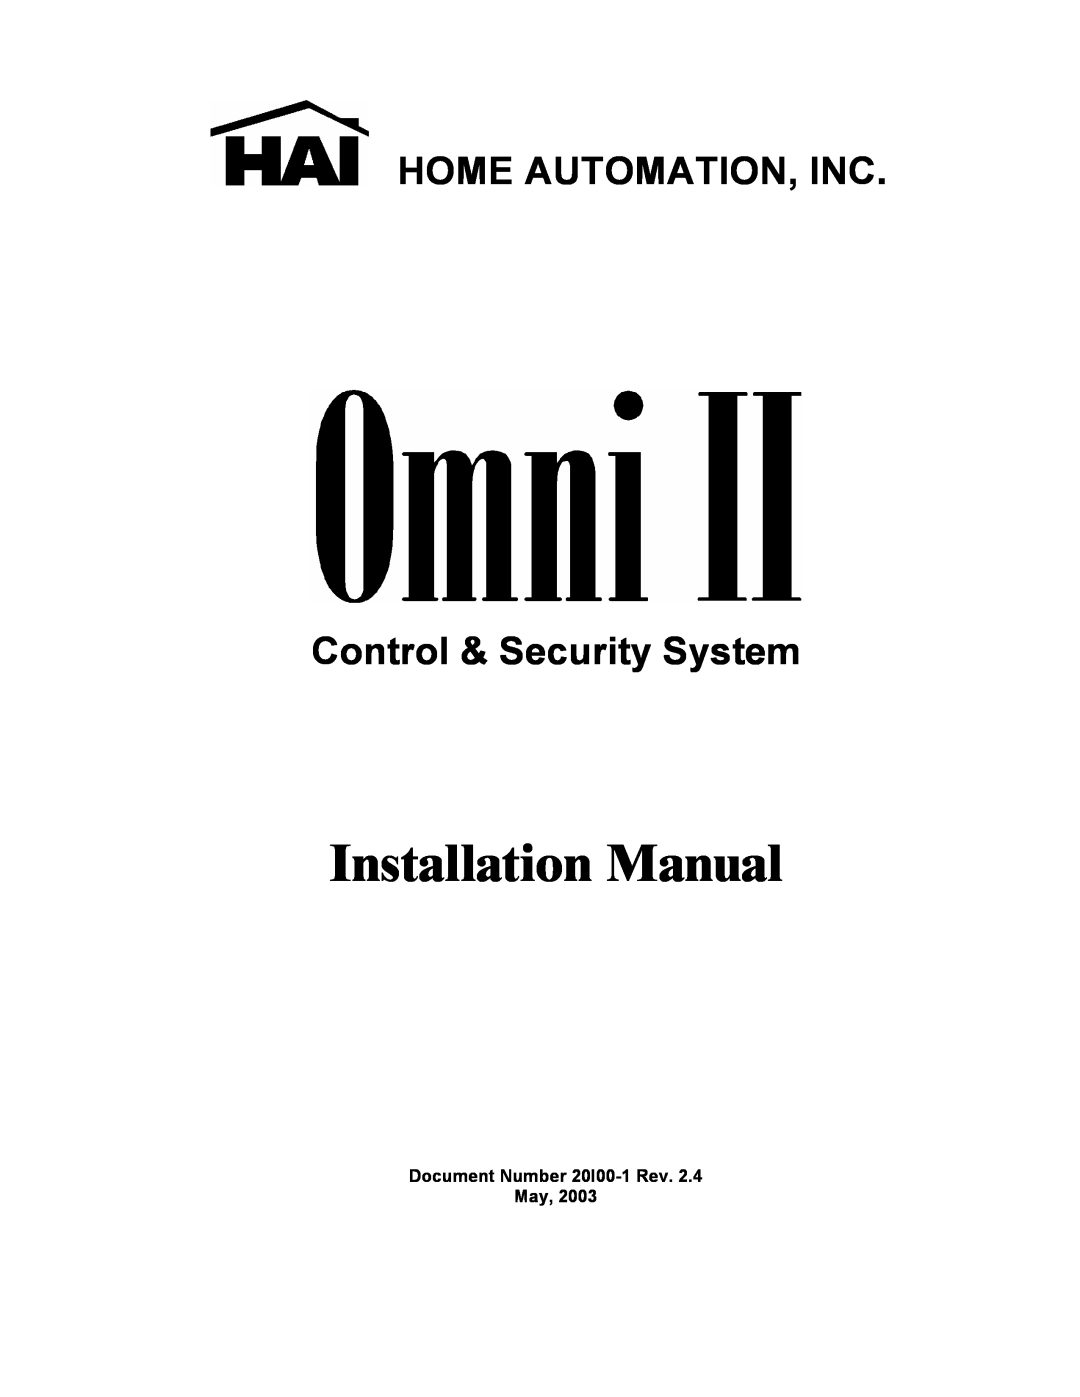 Home Automation 20A00-1 installation manual Installation Manual, Home Automation, Inc, Control & Security System 